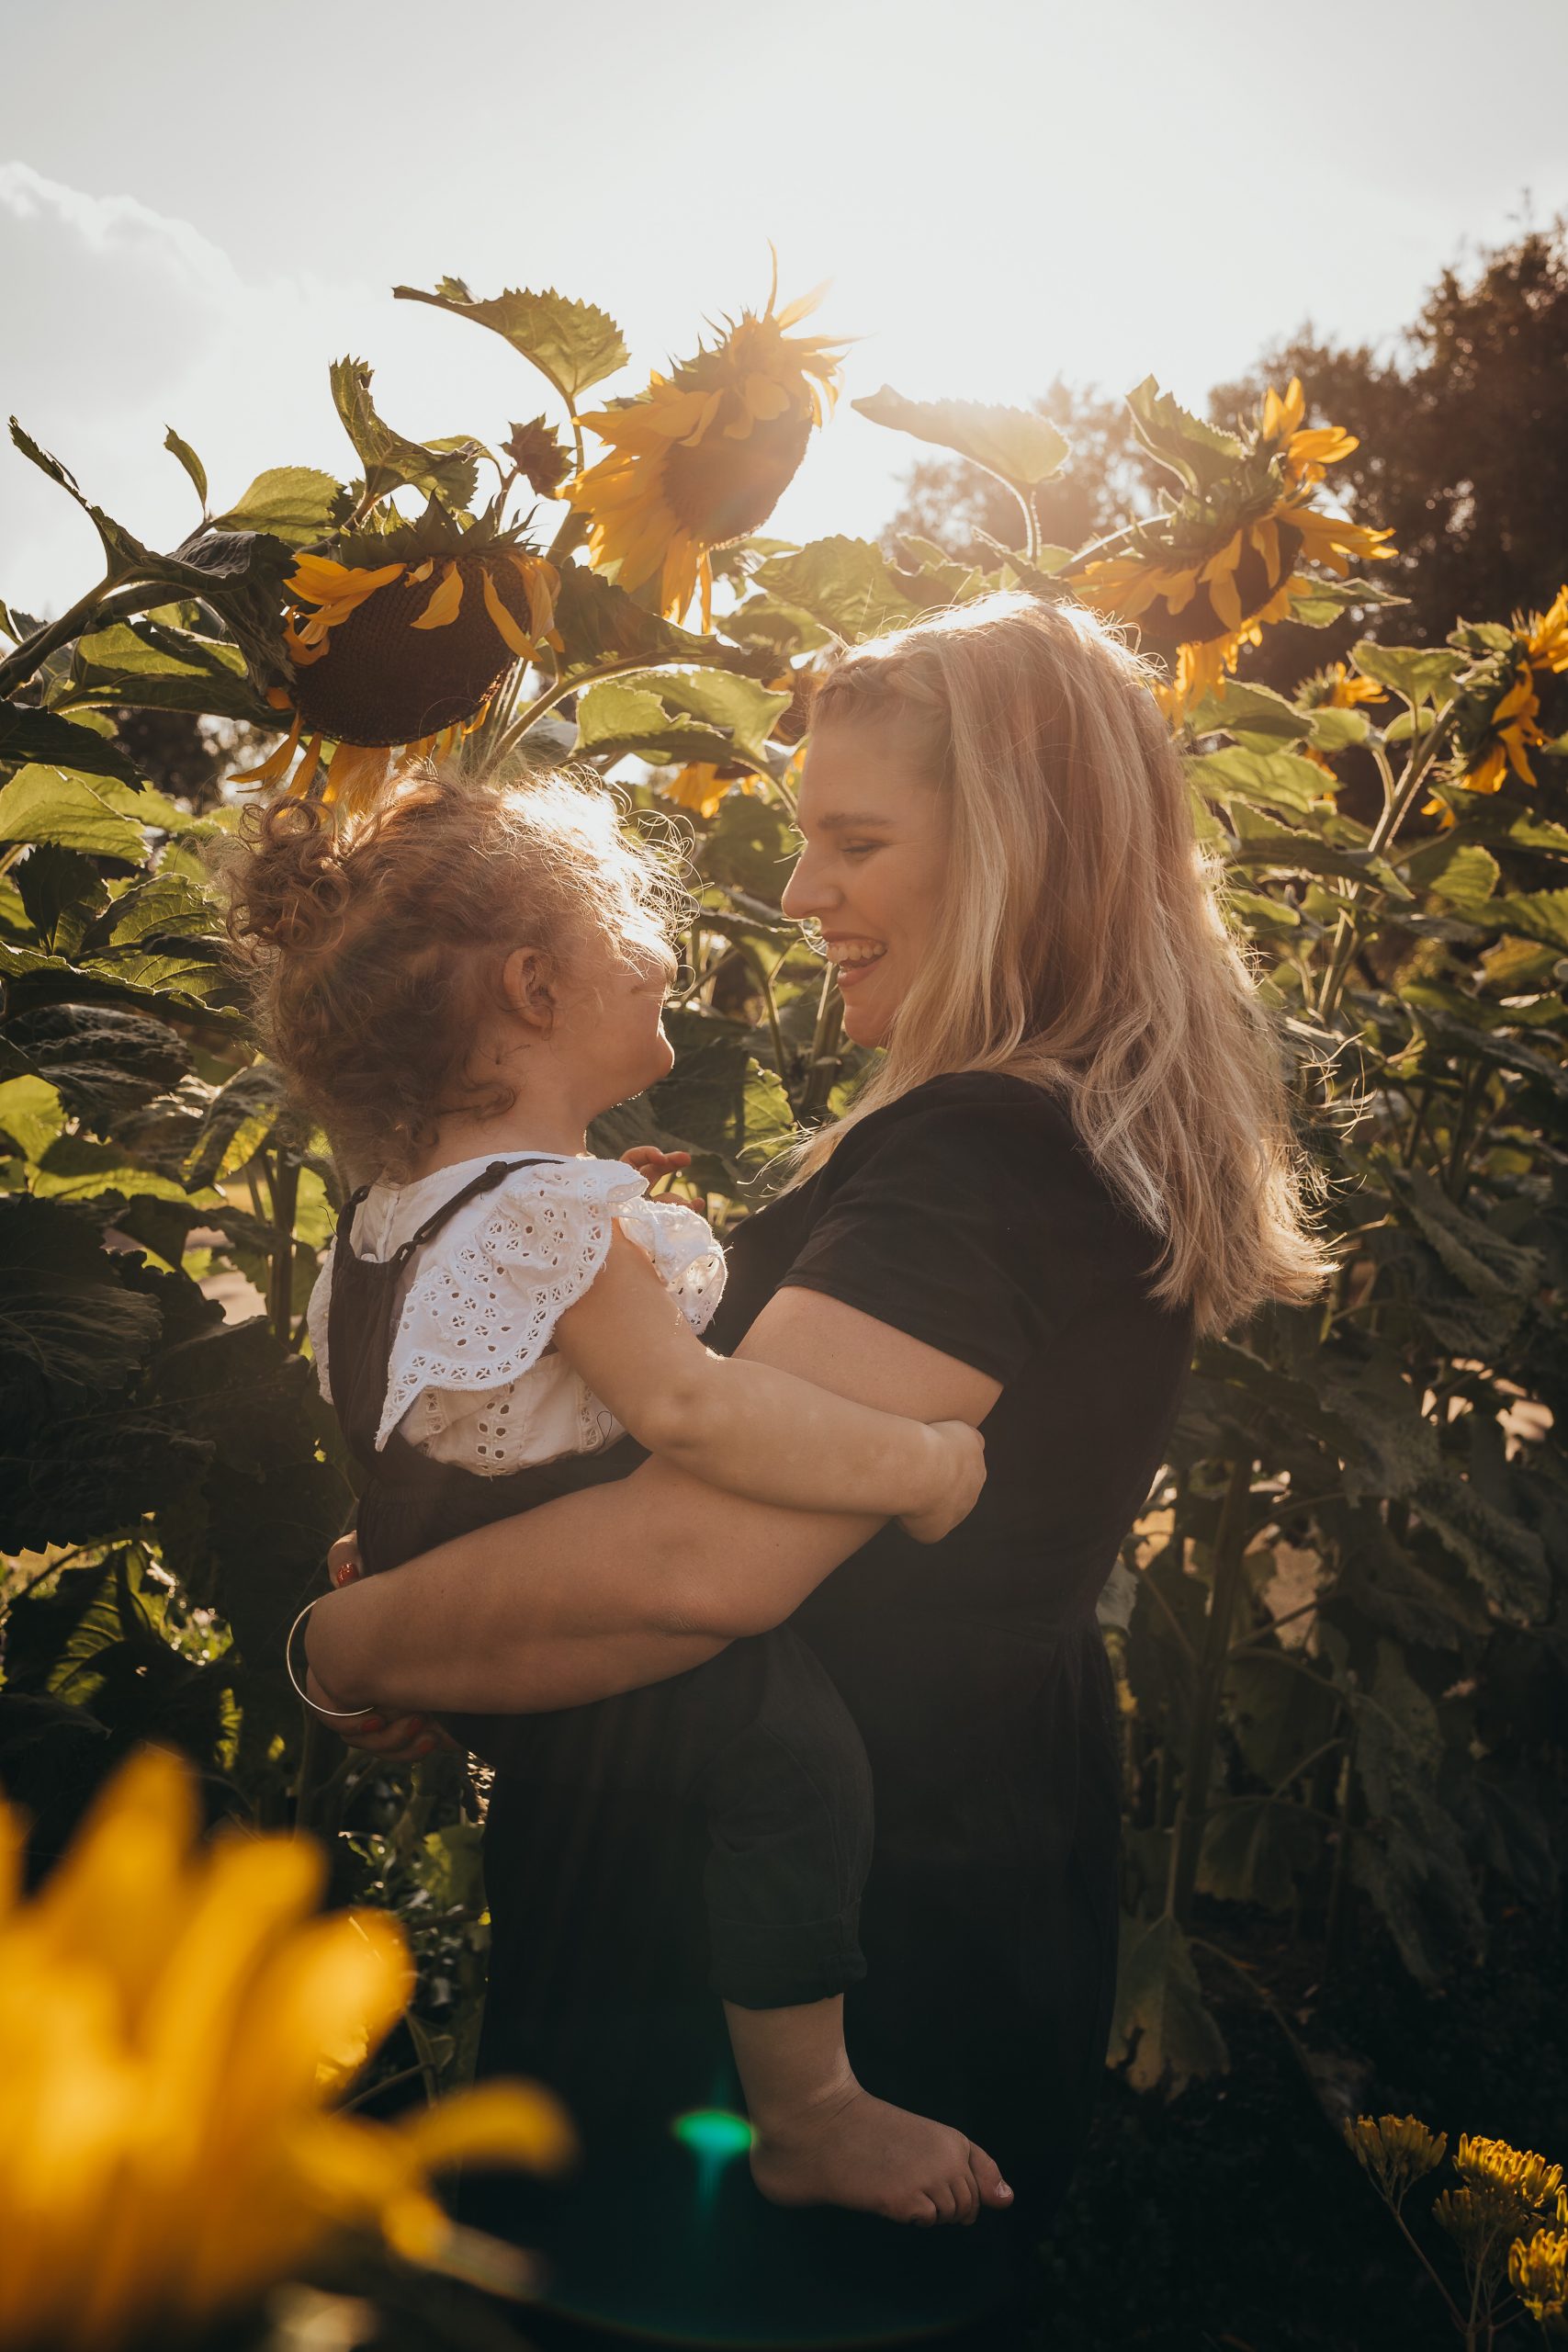 A Family Photoshoot In The Sunflowers